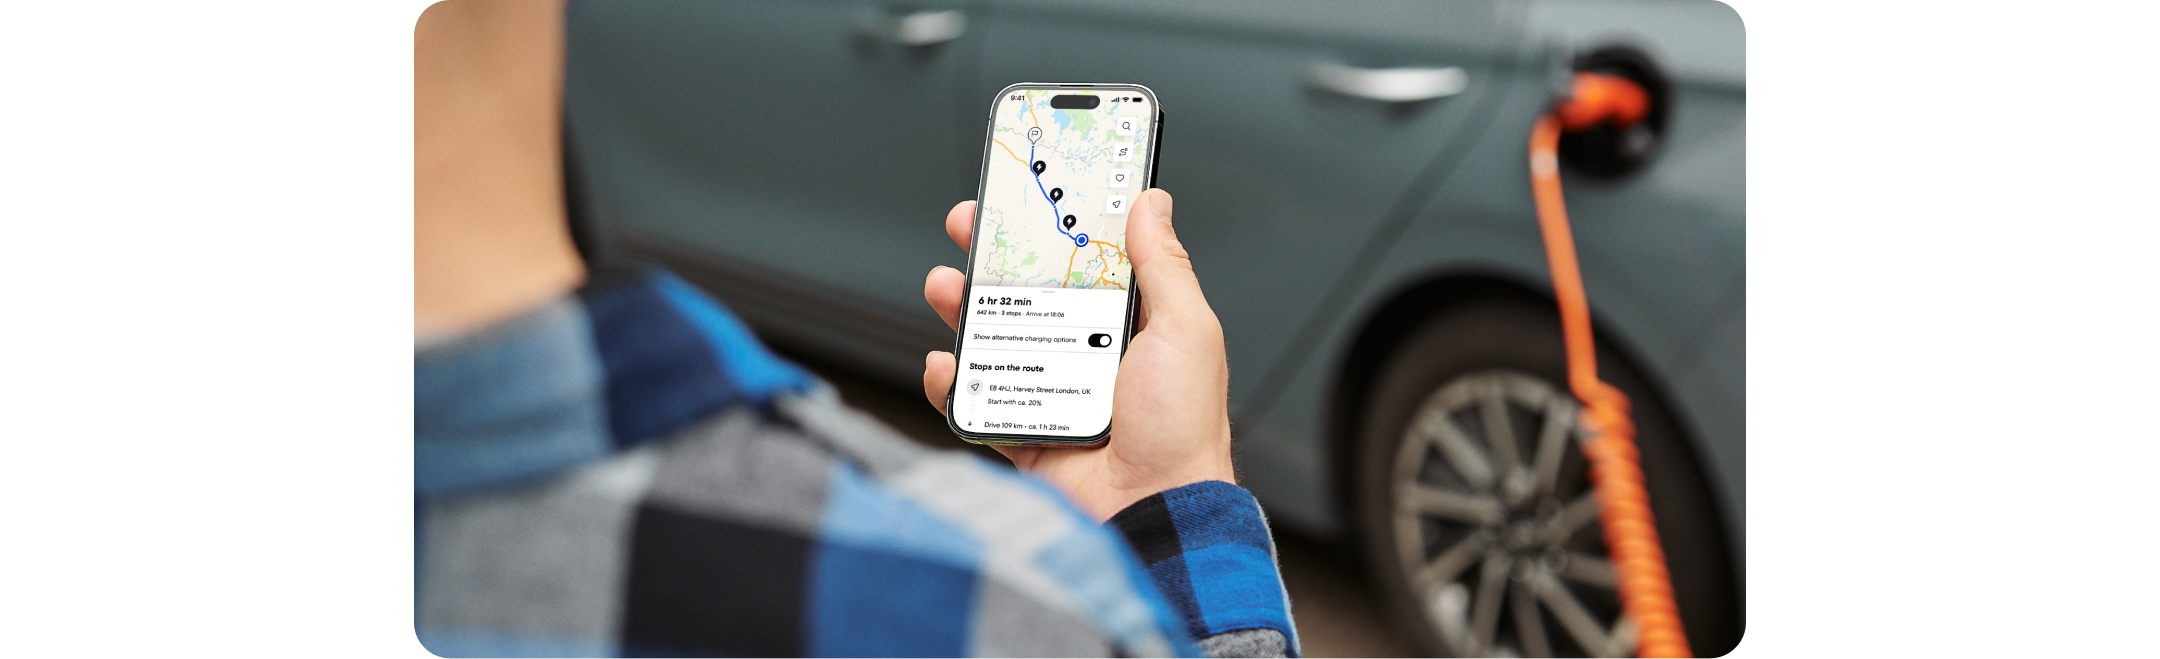 Plan your charging stops with Plugsurfing app's new route planner feature